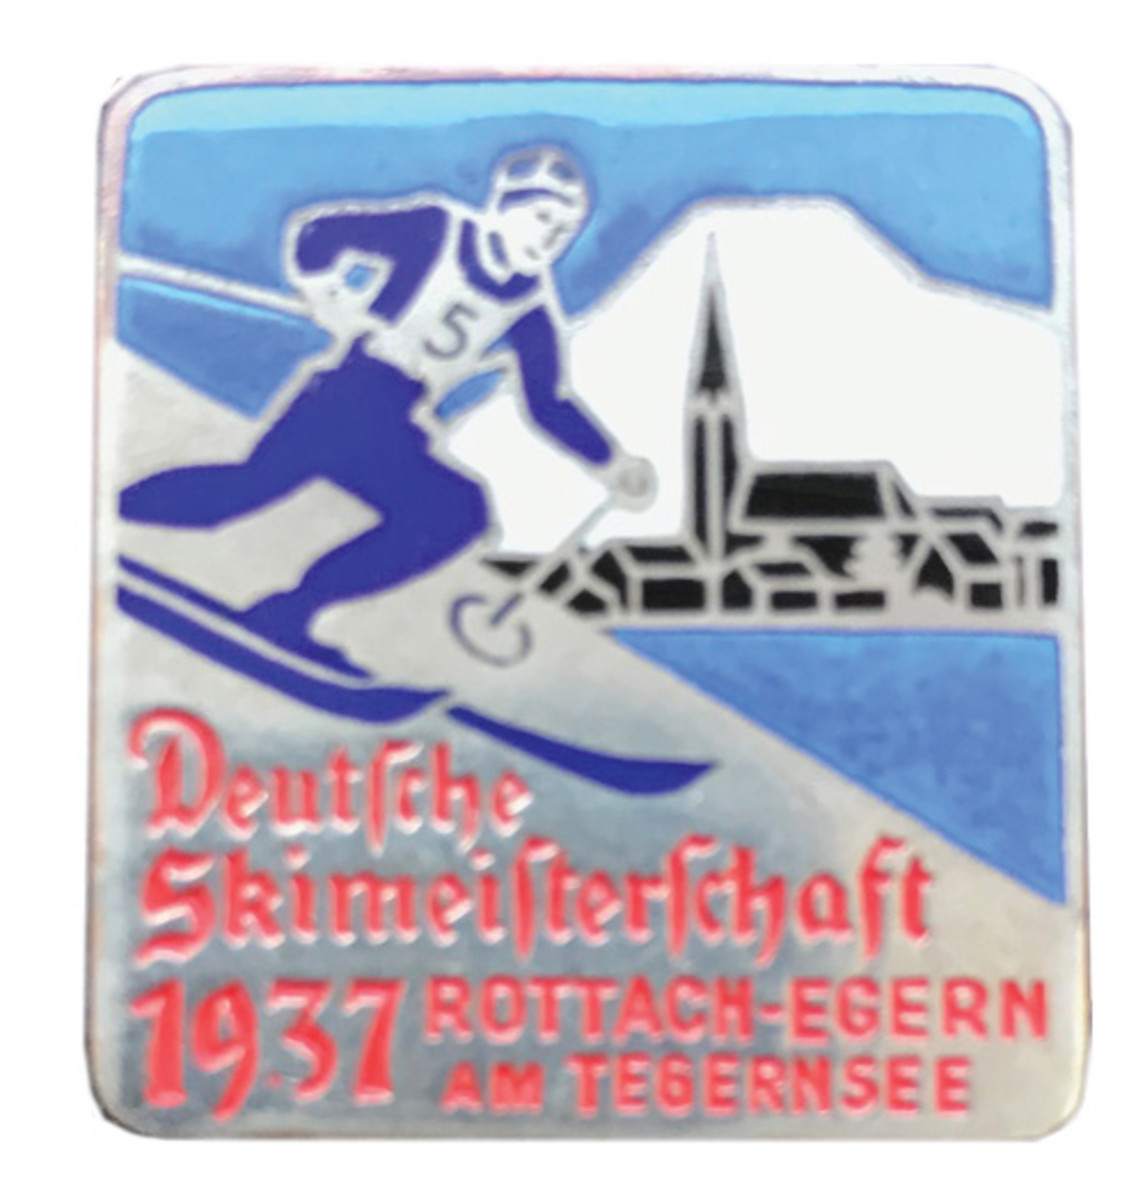 A 1937 German Ski Championship Badge for an event held February 18-22, 1937, in Rottach-Egern am Tegernsee, Germany. This badge is constructed of silvered bronze with enamel features and displays a downhill skier with the village of Rottach-Egern in the background. The badge is approximately 30 X 30 mm with a horizontal pin on the reverse. These badges are scarce costing about $100.